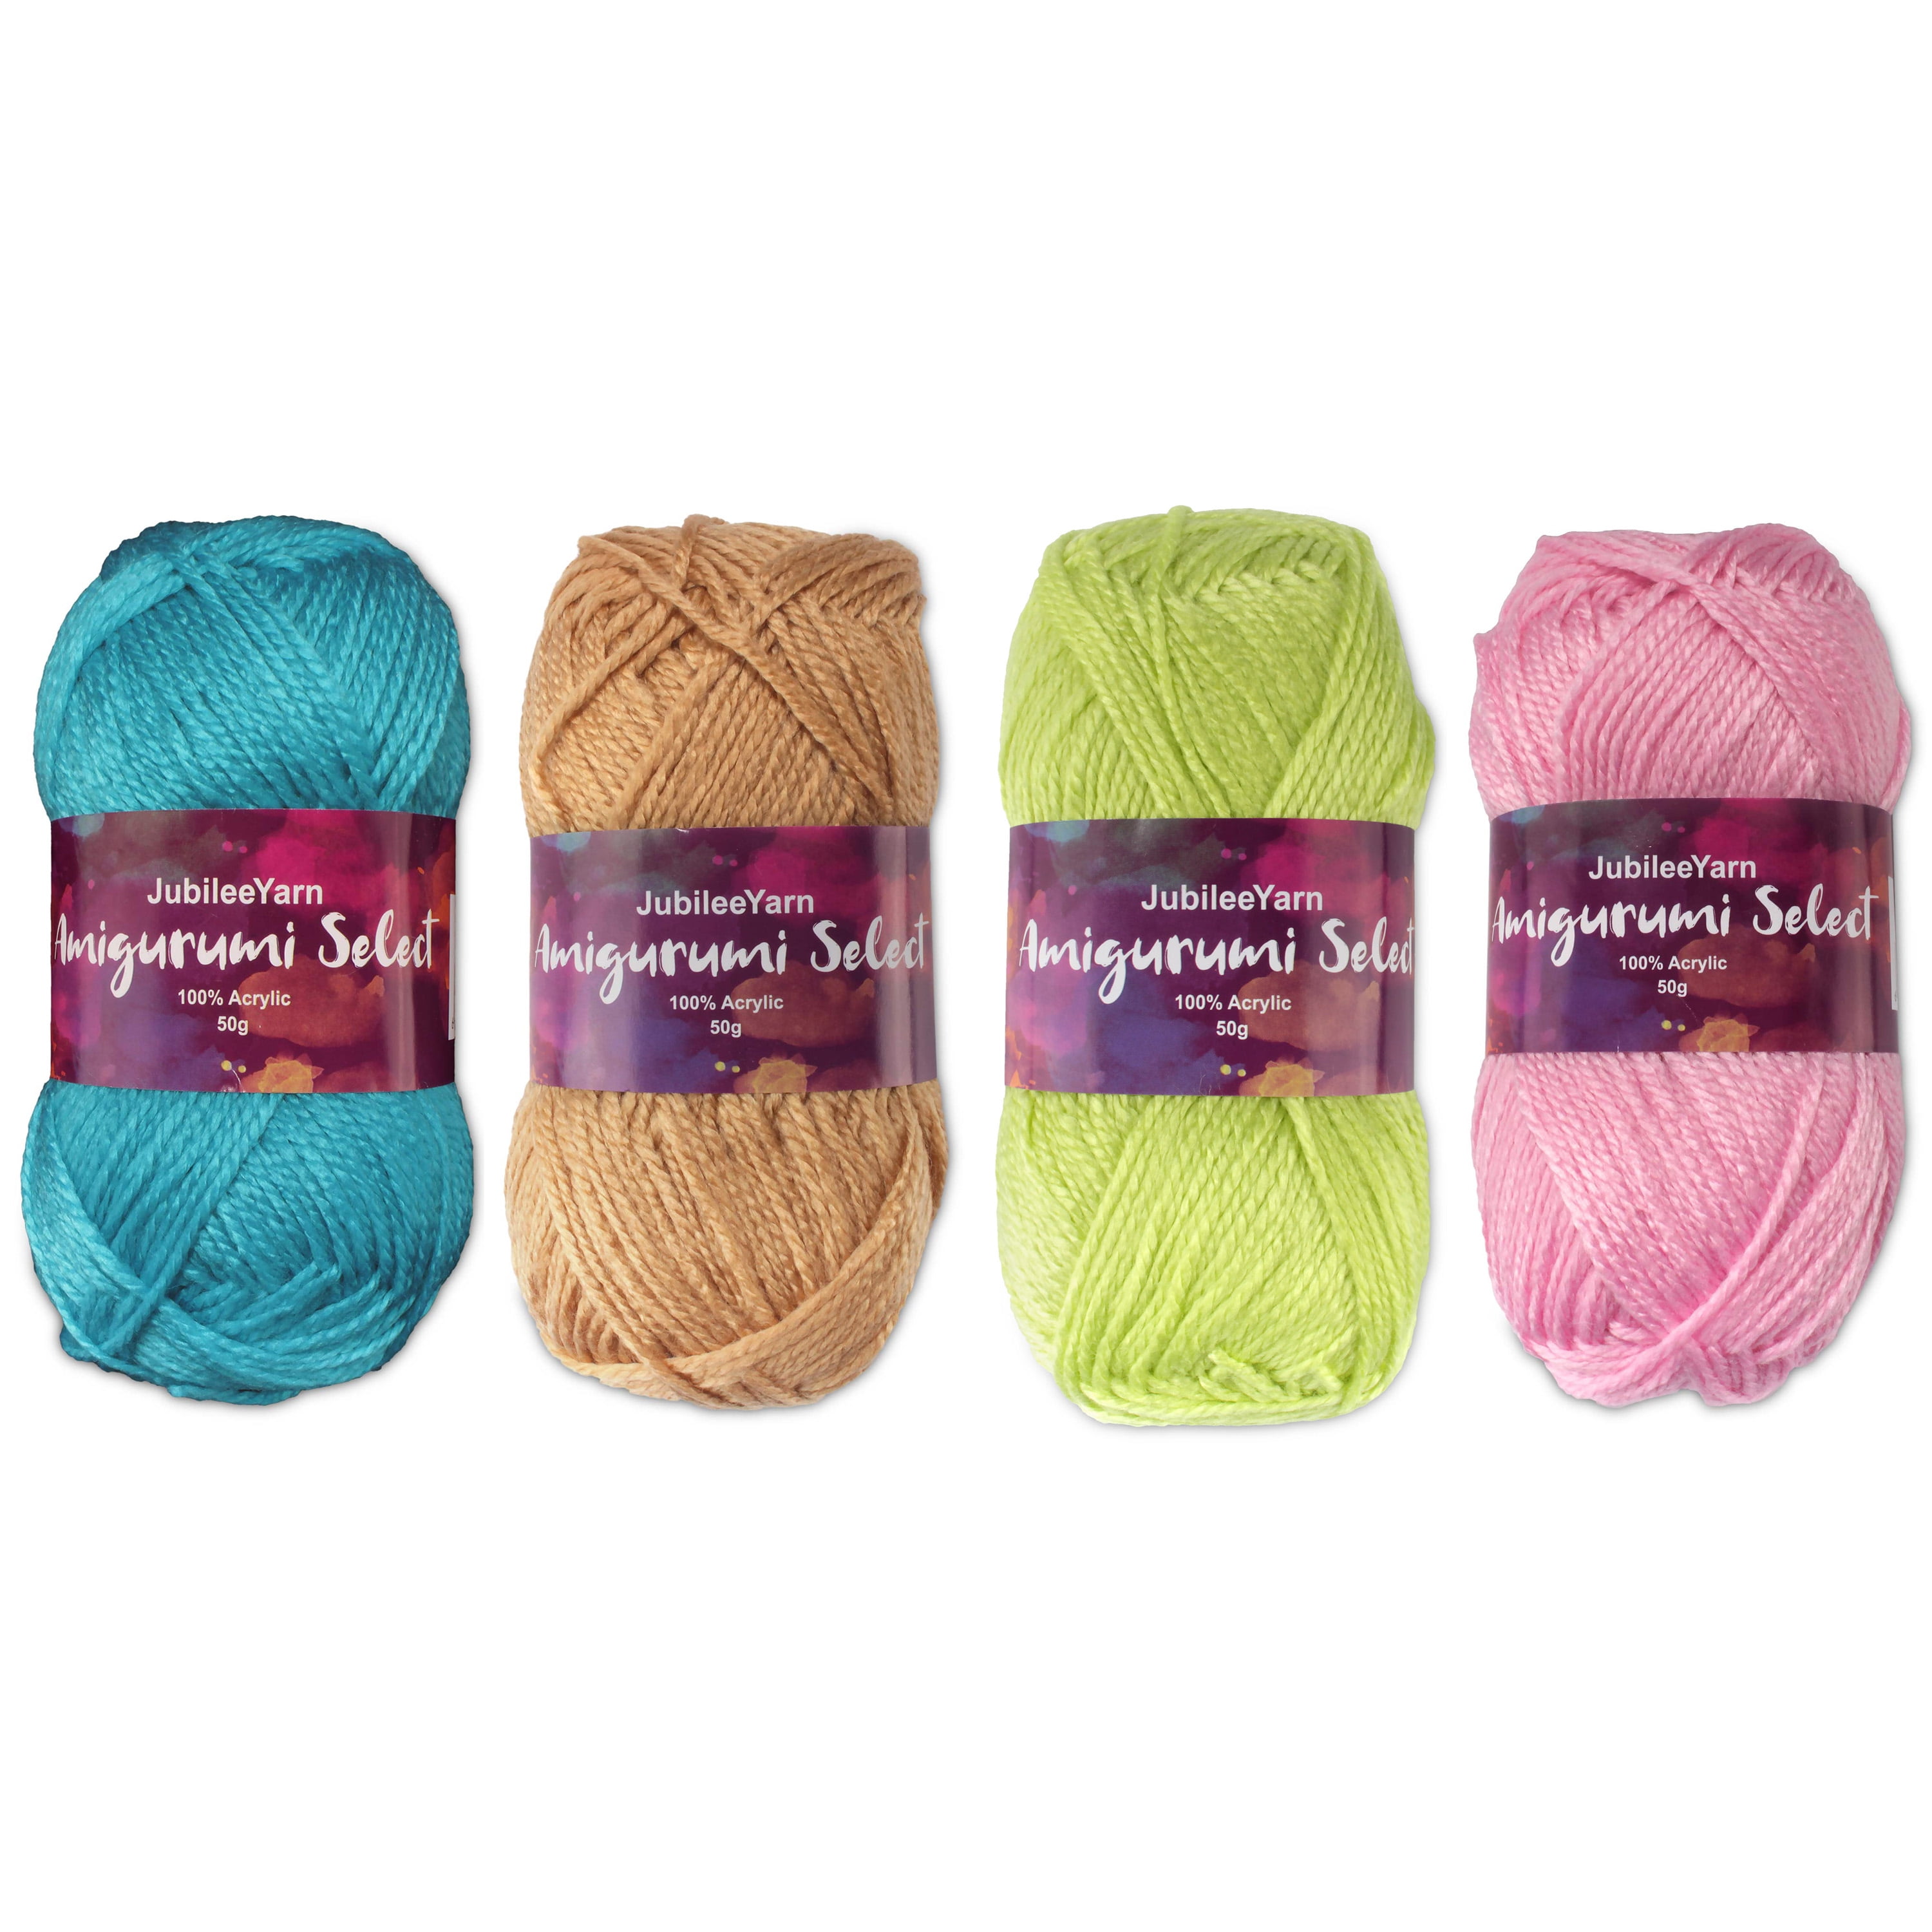 12-point Checklist to Select the Best Yarn for Amigurumi — Pocket Yarnlings  — Pocket Yarnlings